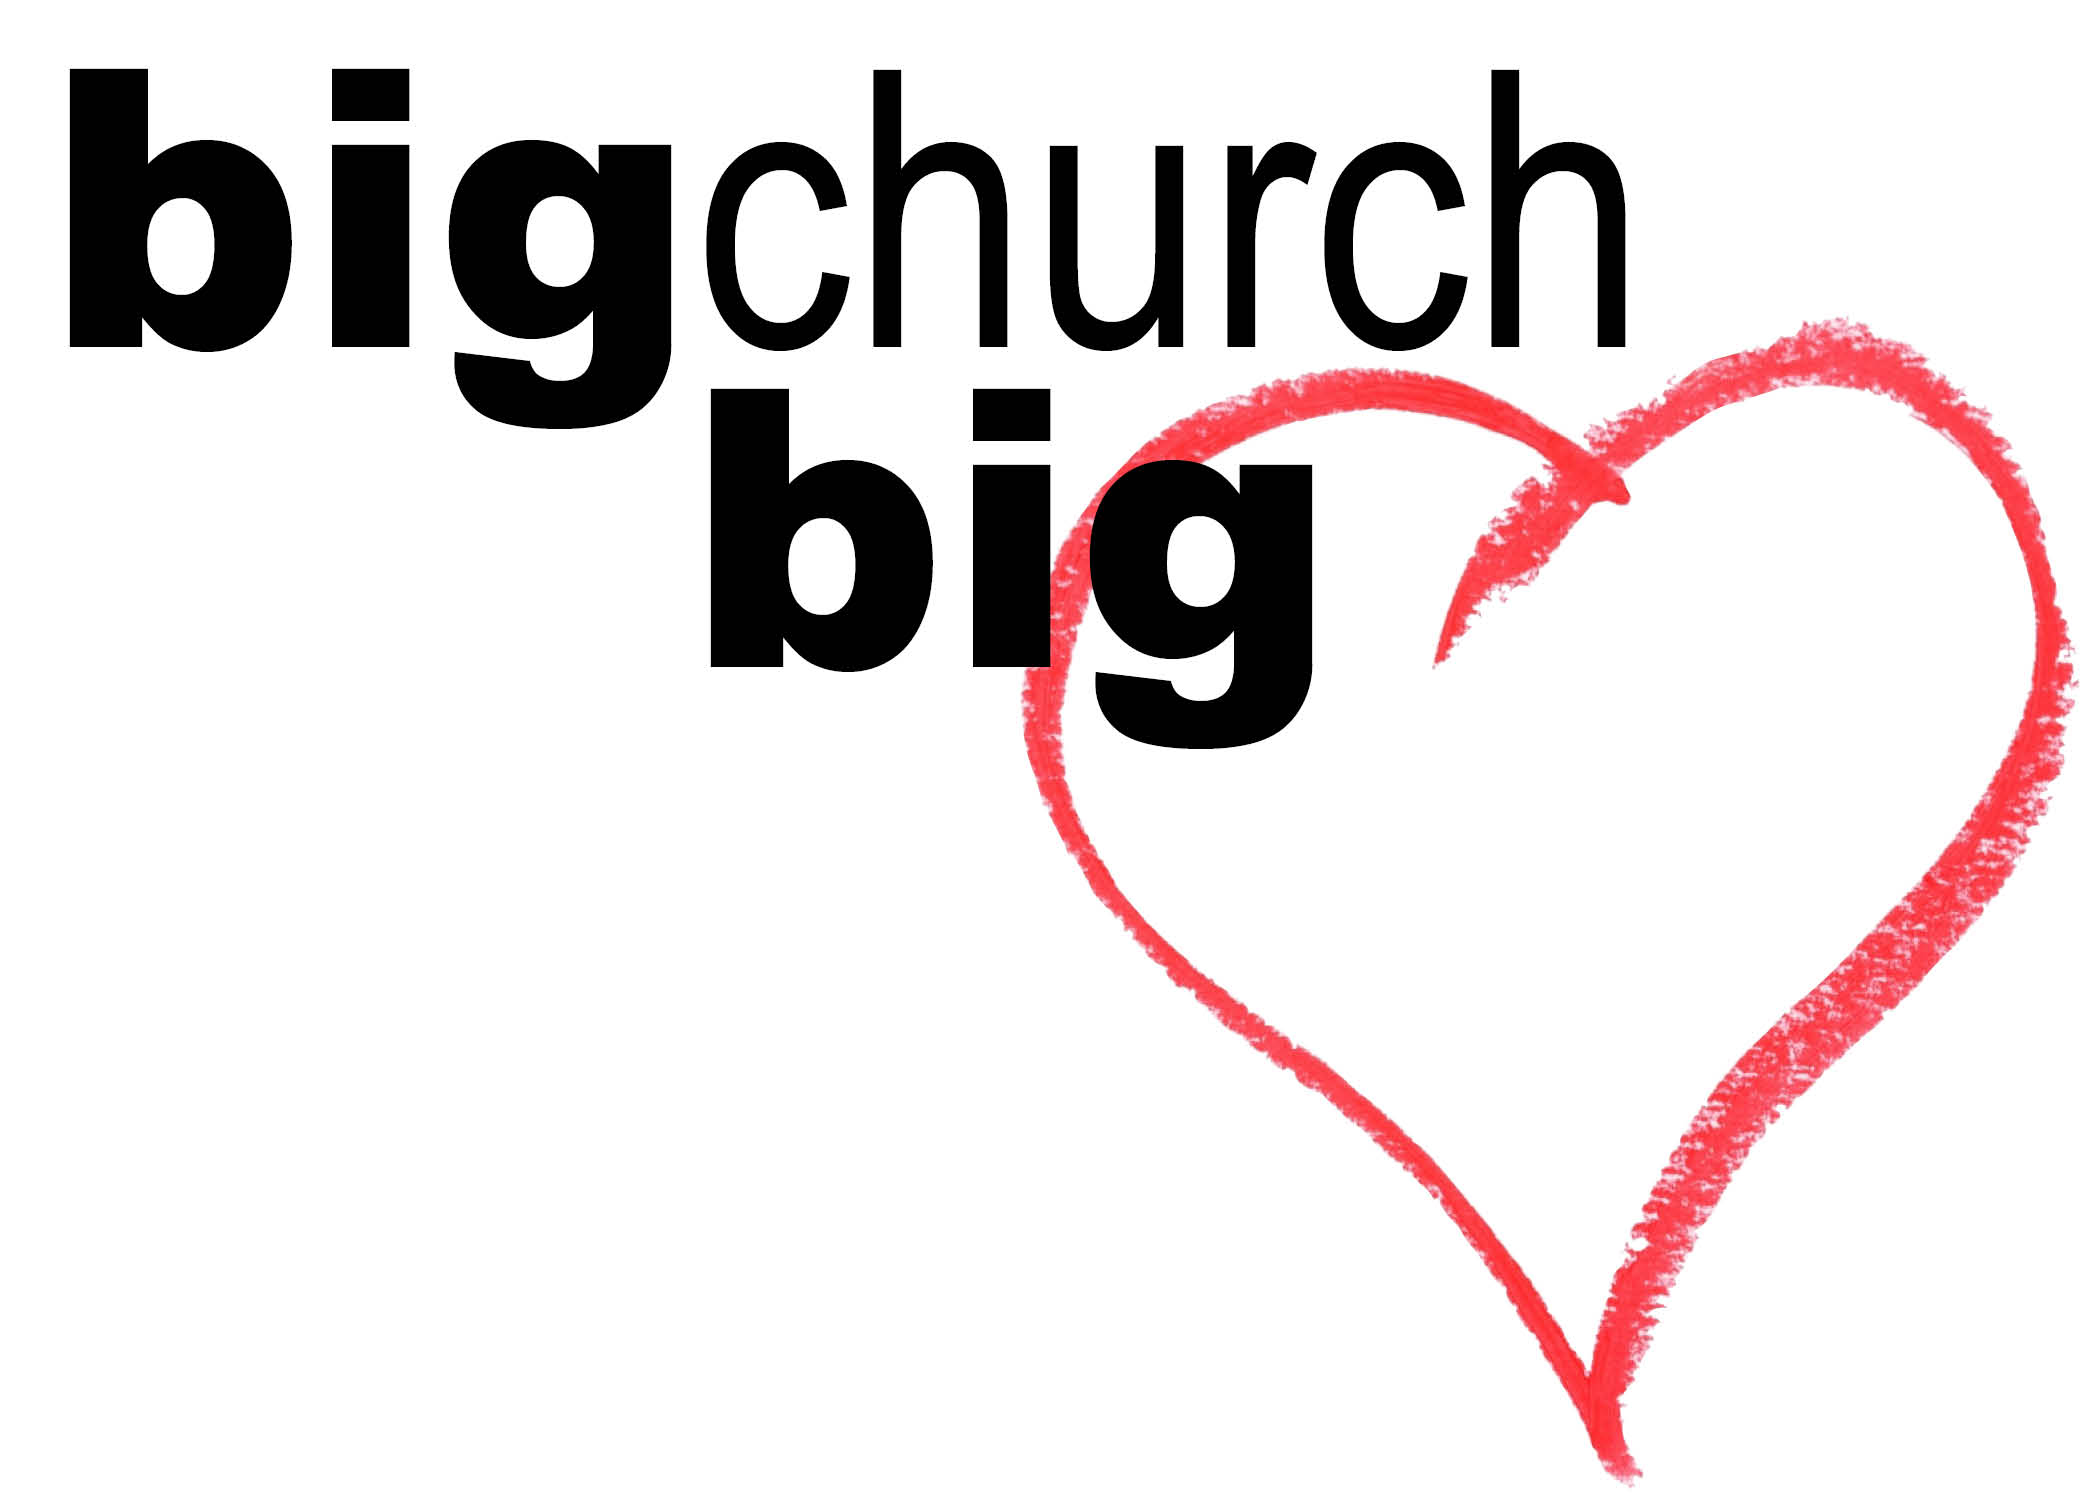 Big Church Big Heart | All in for Christ!